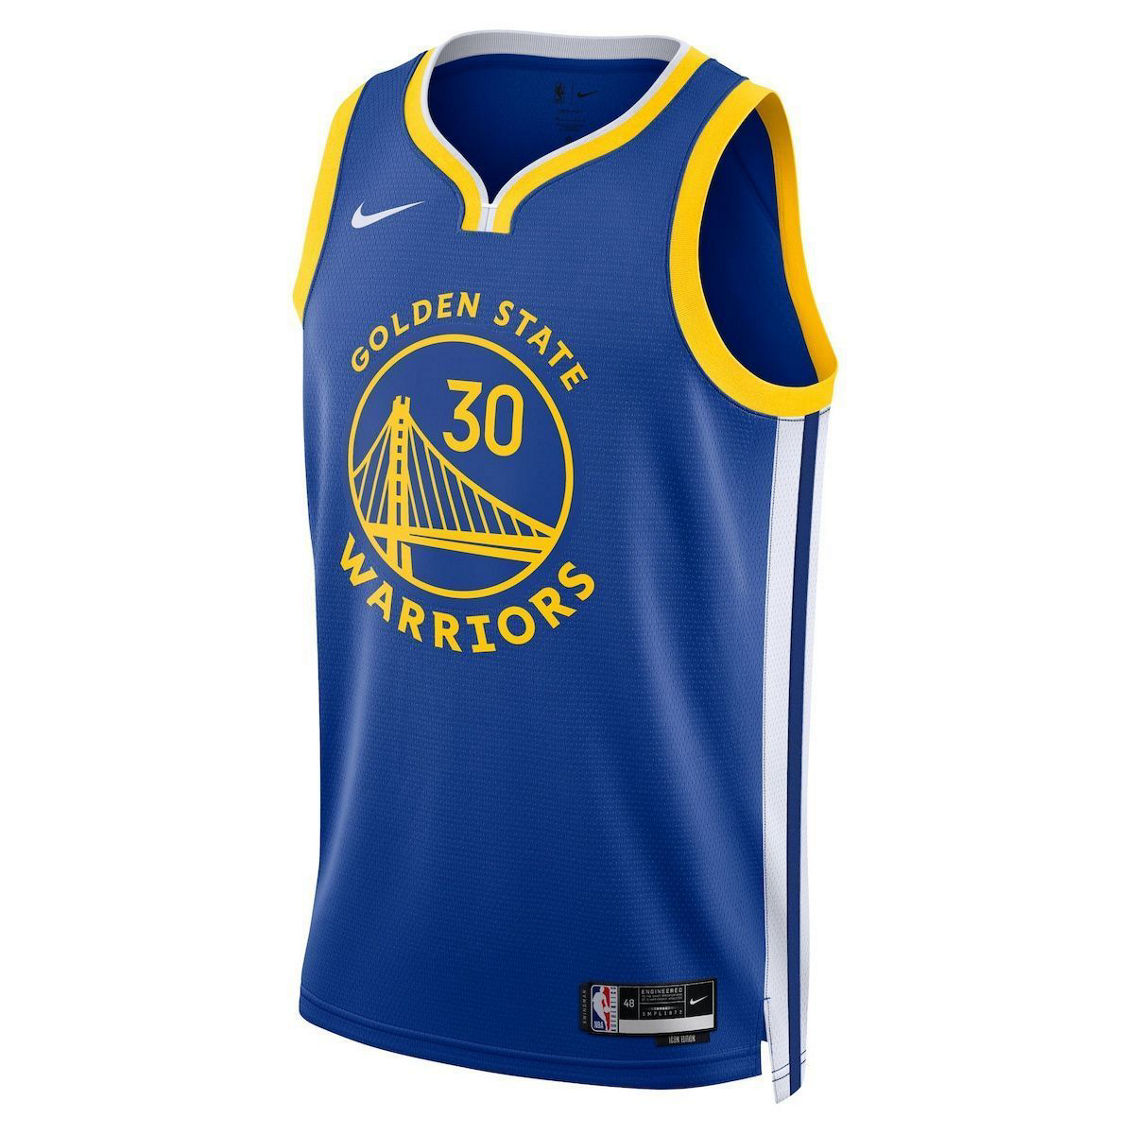 Nike Unisex Stephen Curry Royal Golden State Warriors Swingman Jersey - Icon Edition - Image 3 of 4